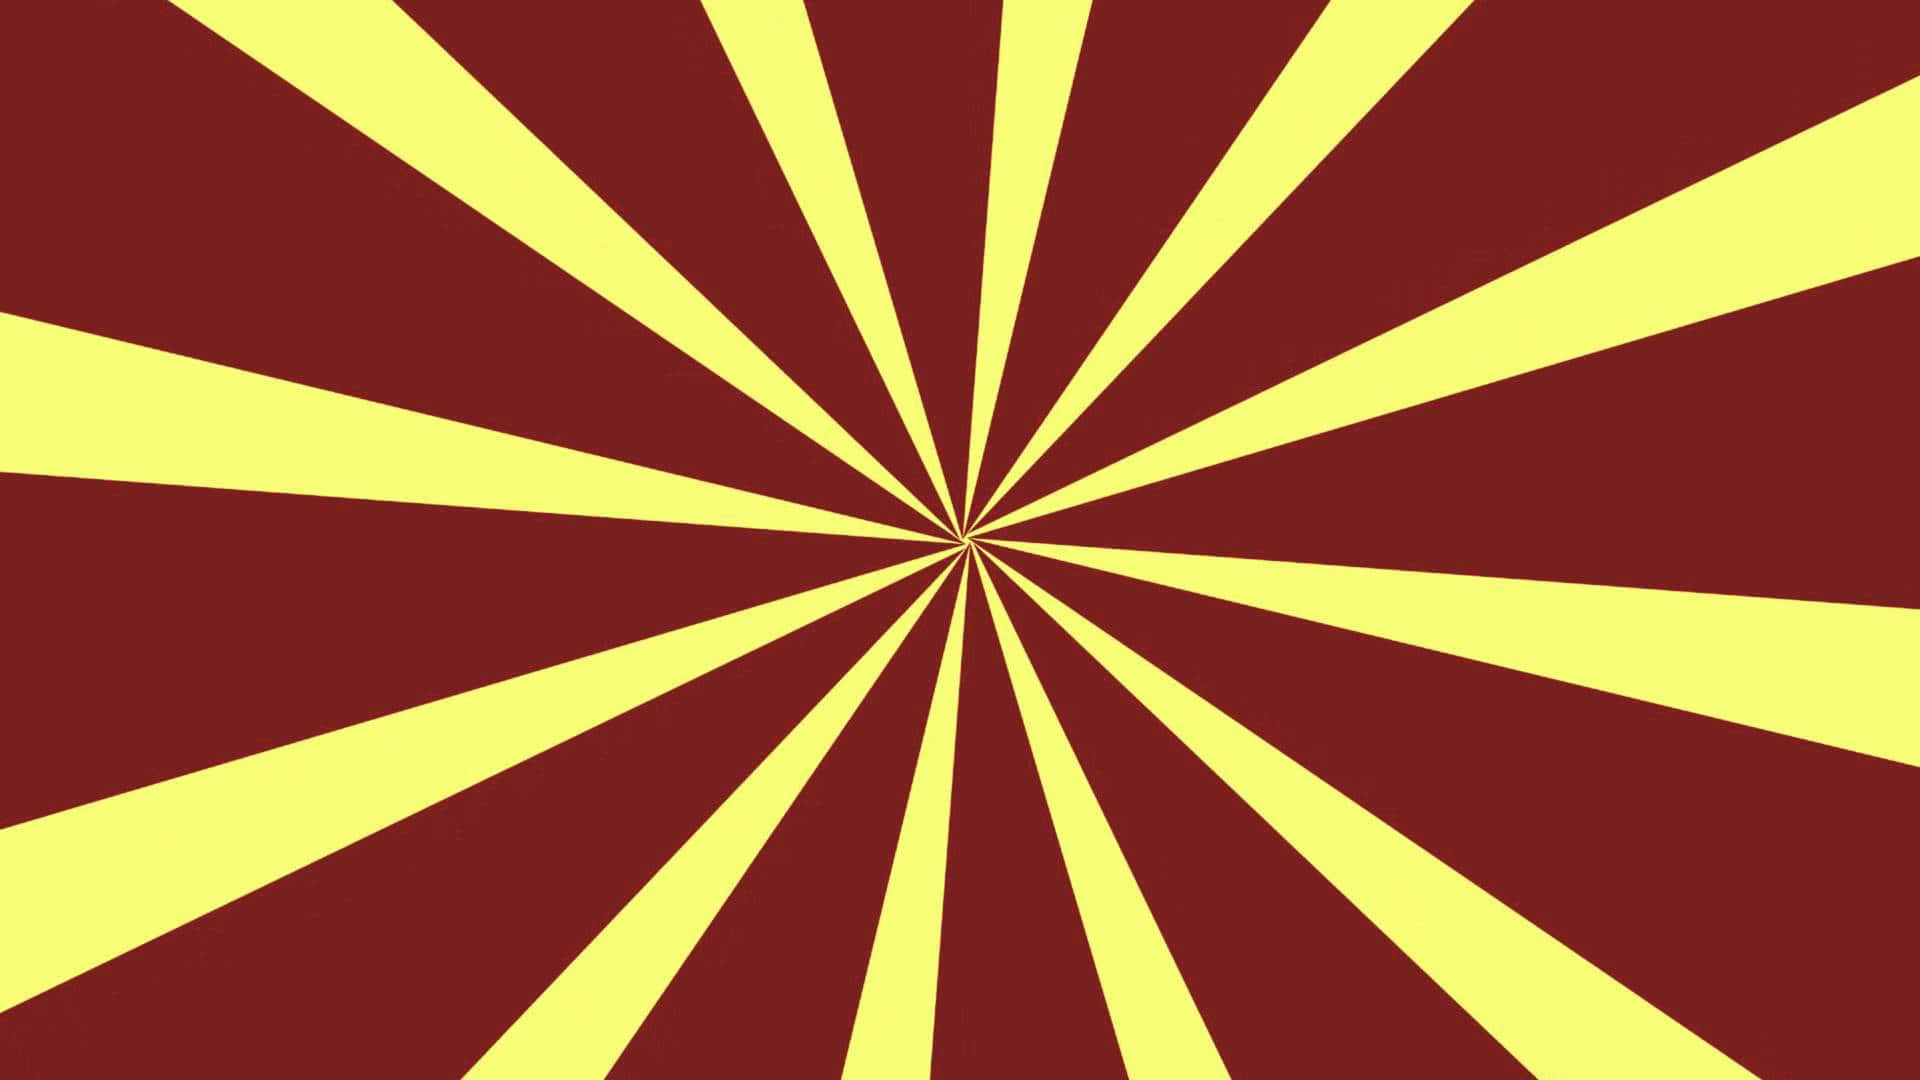 a yellow and red sunburst background